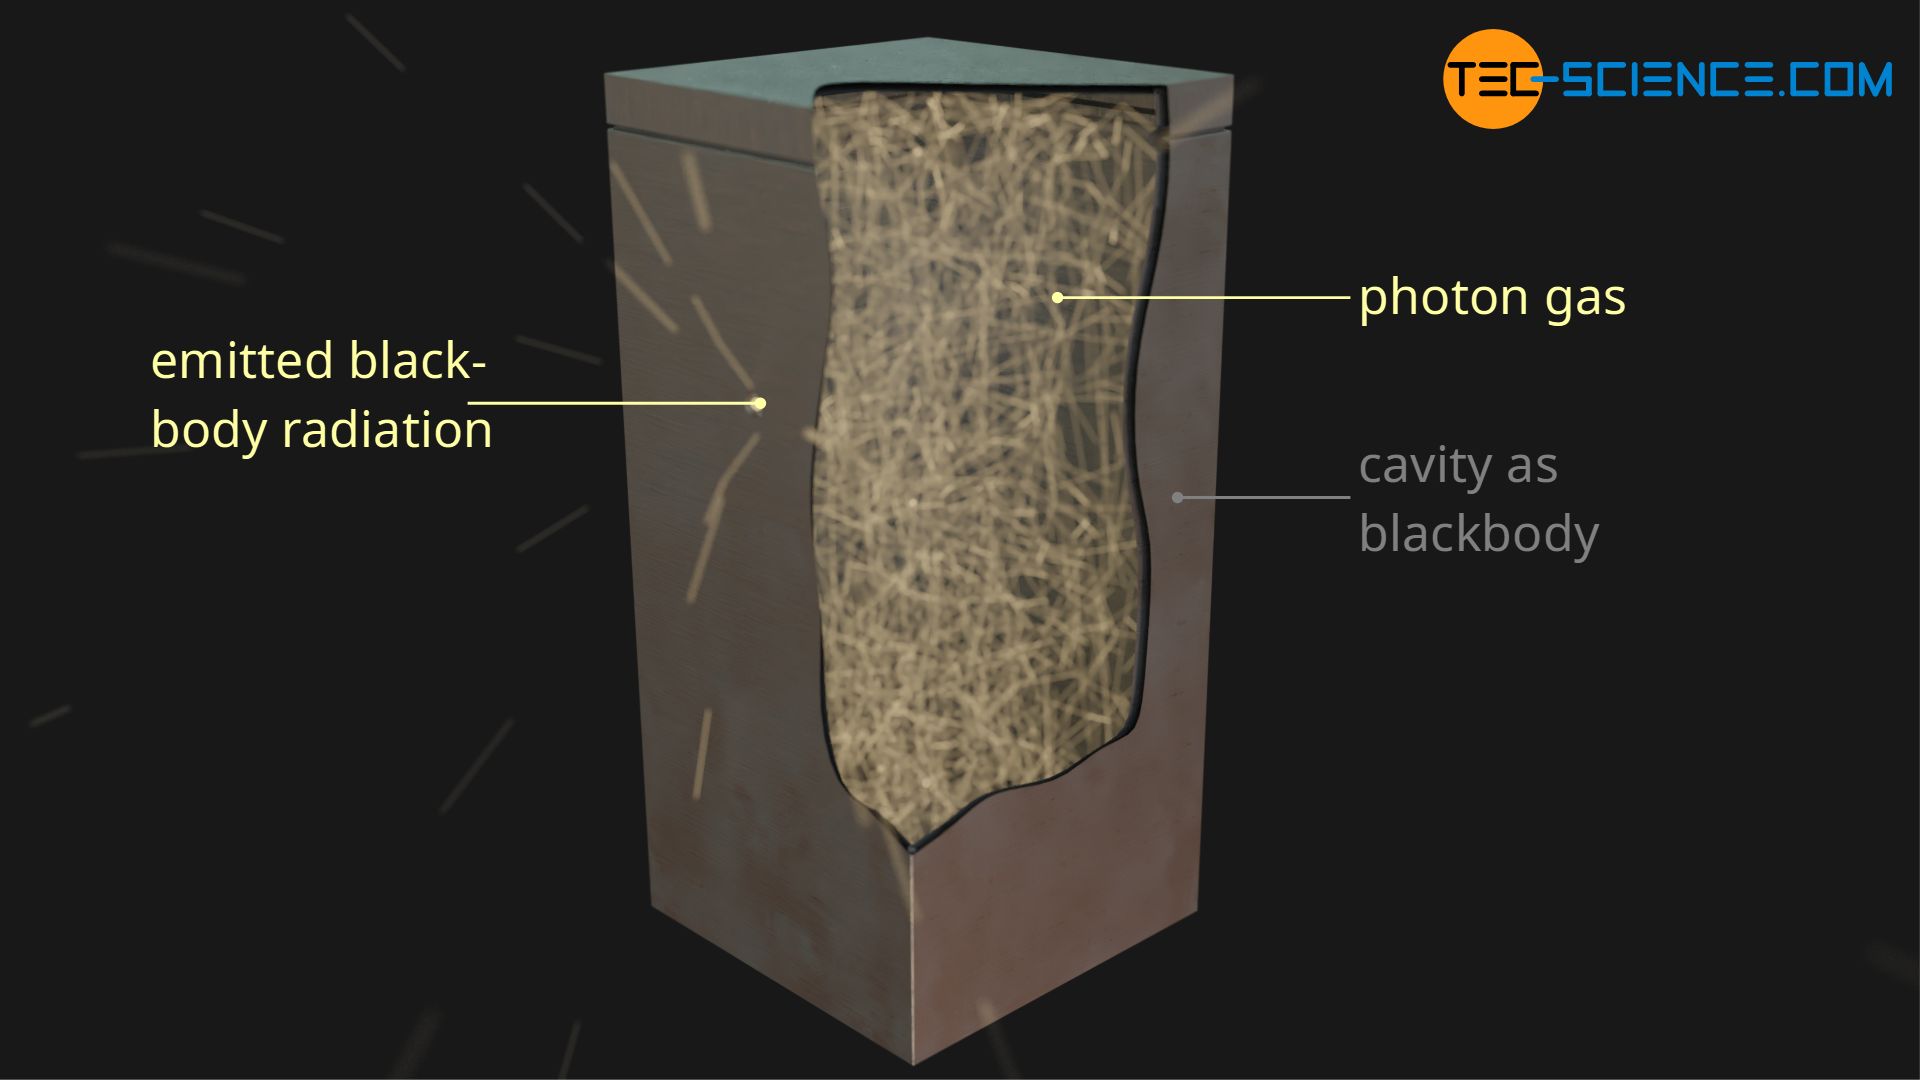 Illustration of the photon gas in a cavity acting as a blackbody